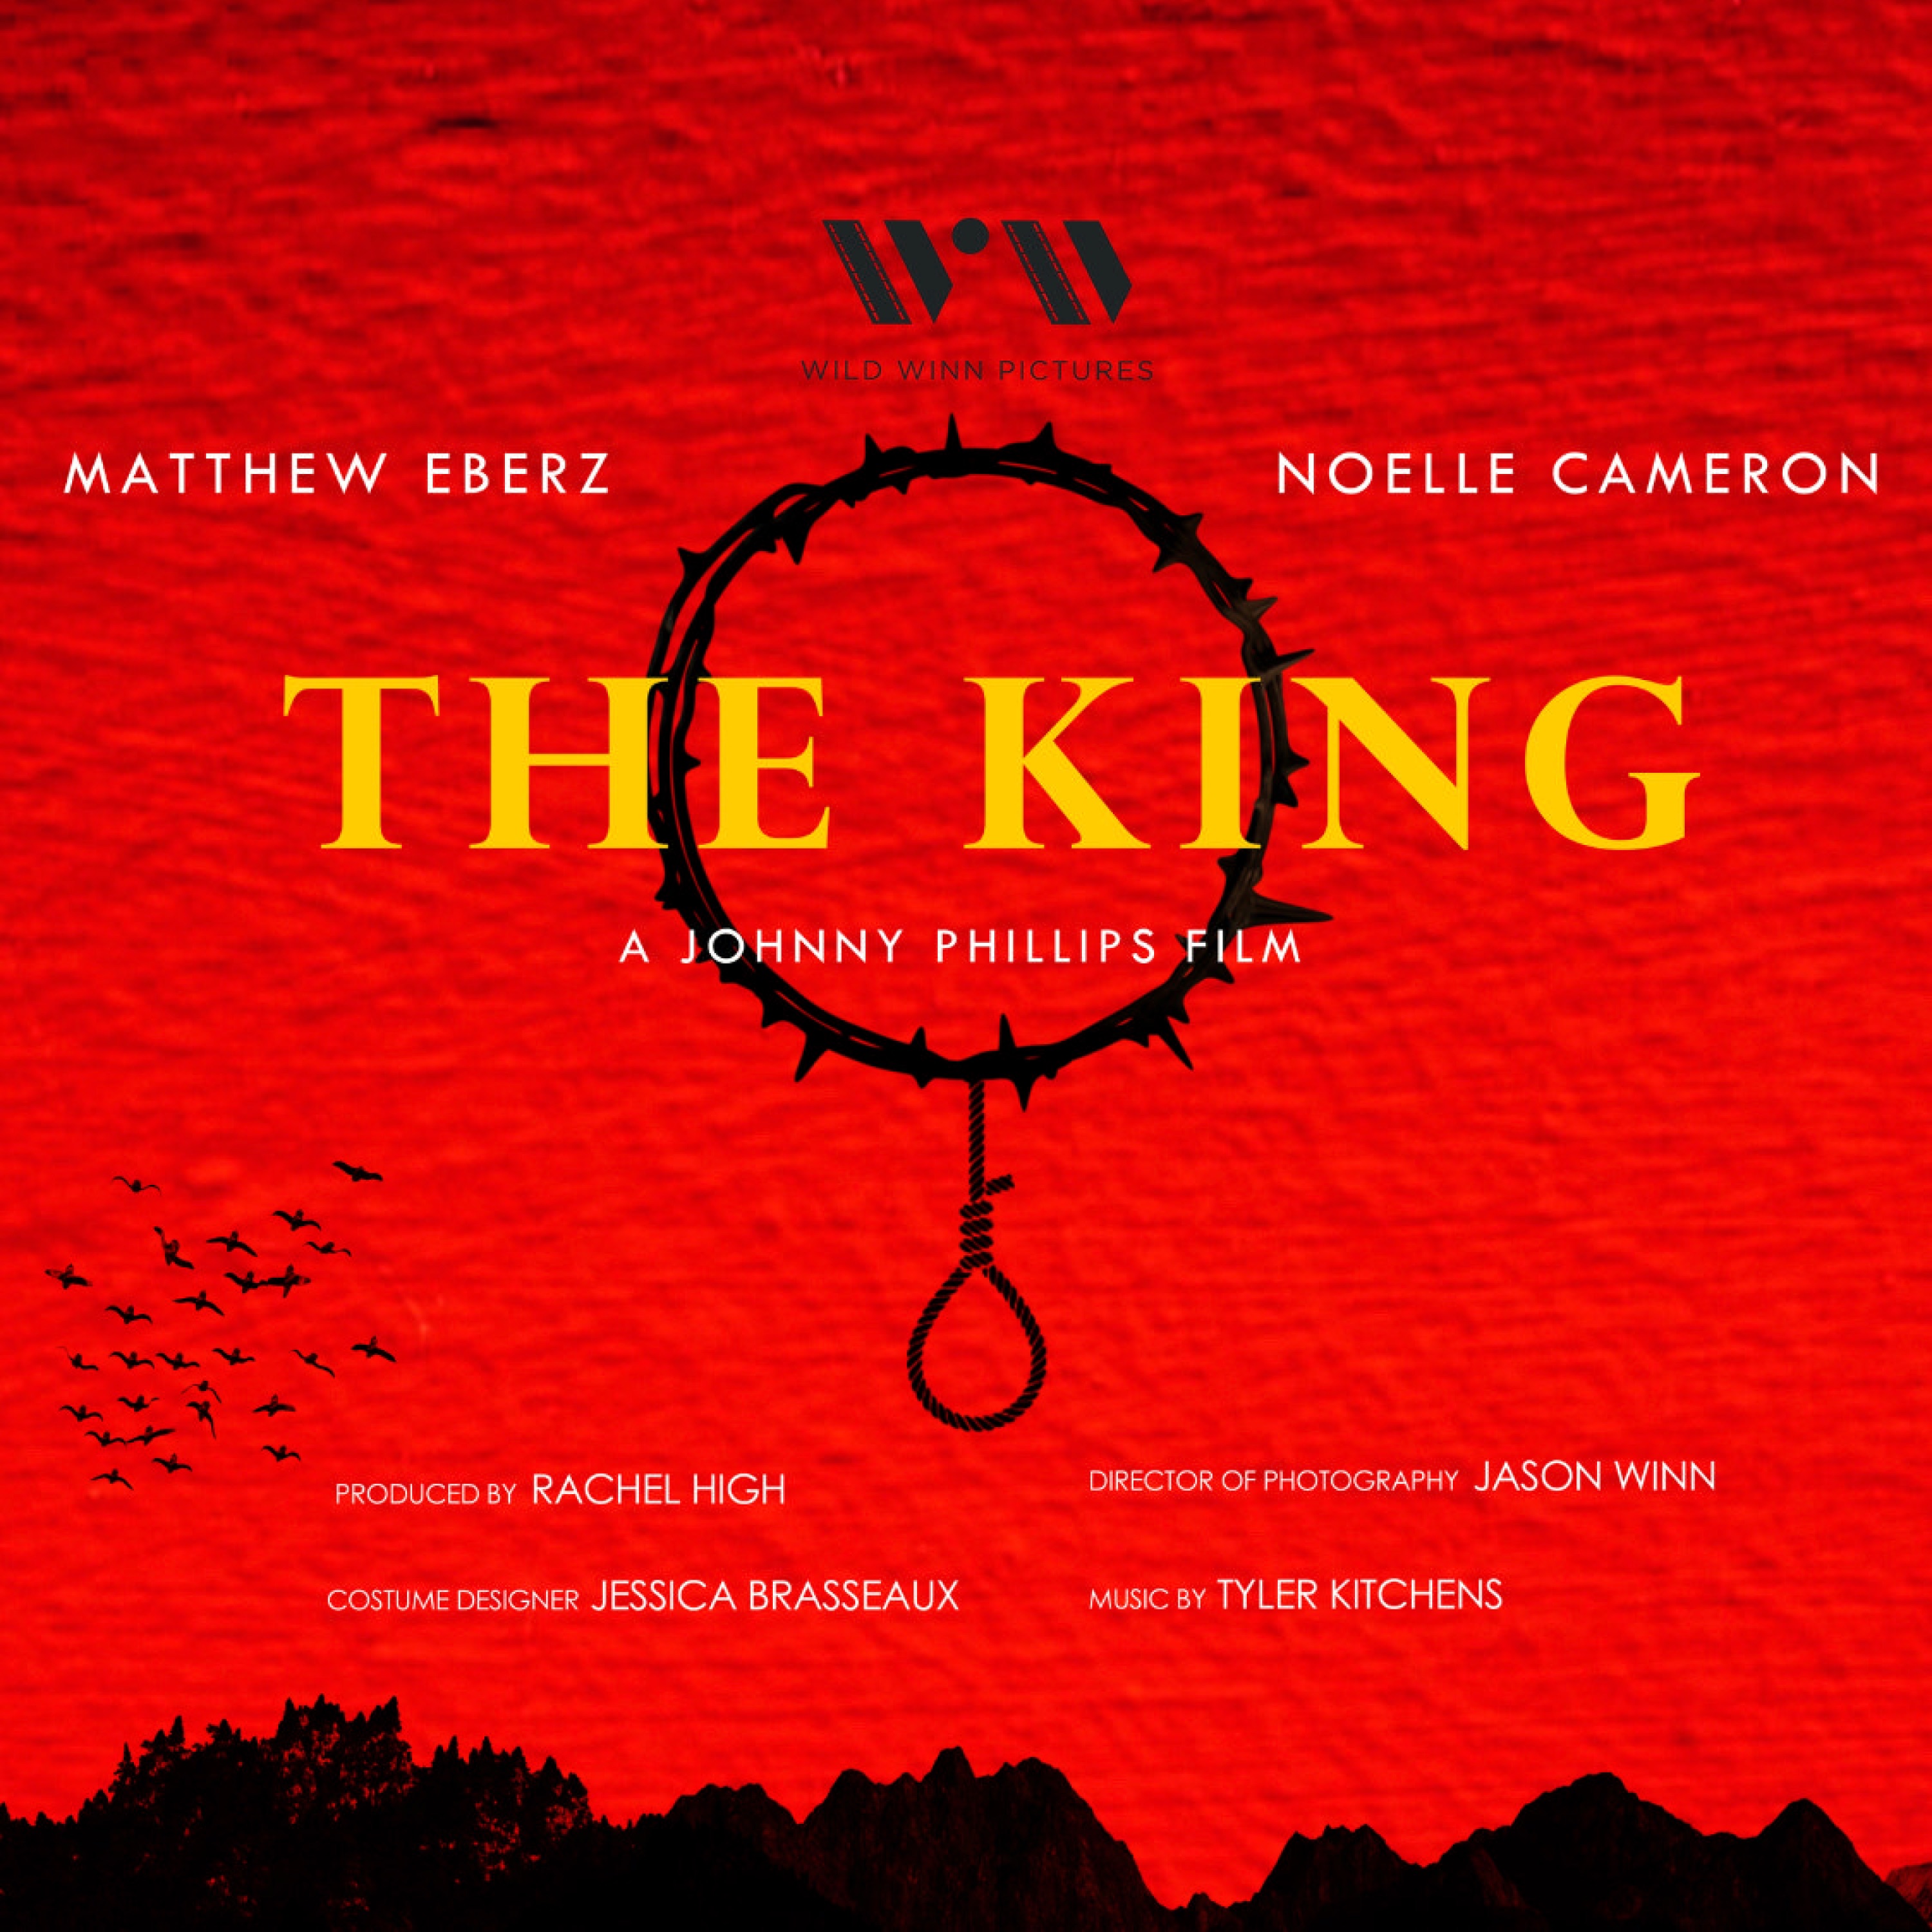 The original king. The King must die OST. For the King Original Soundtrack.